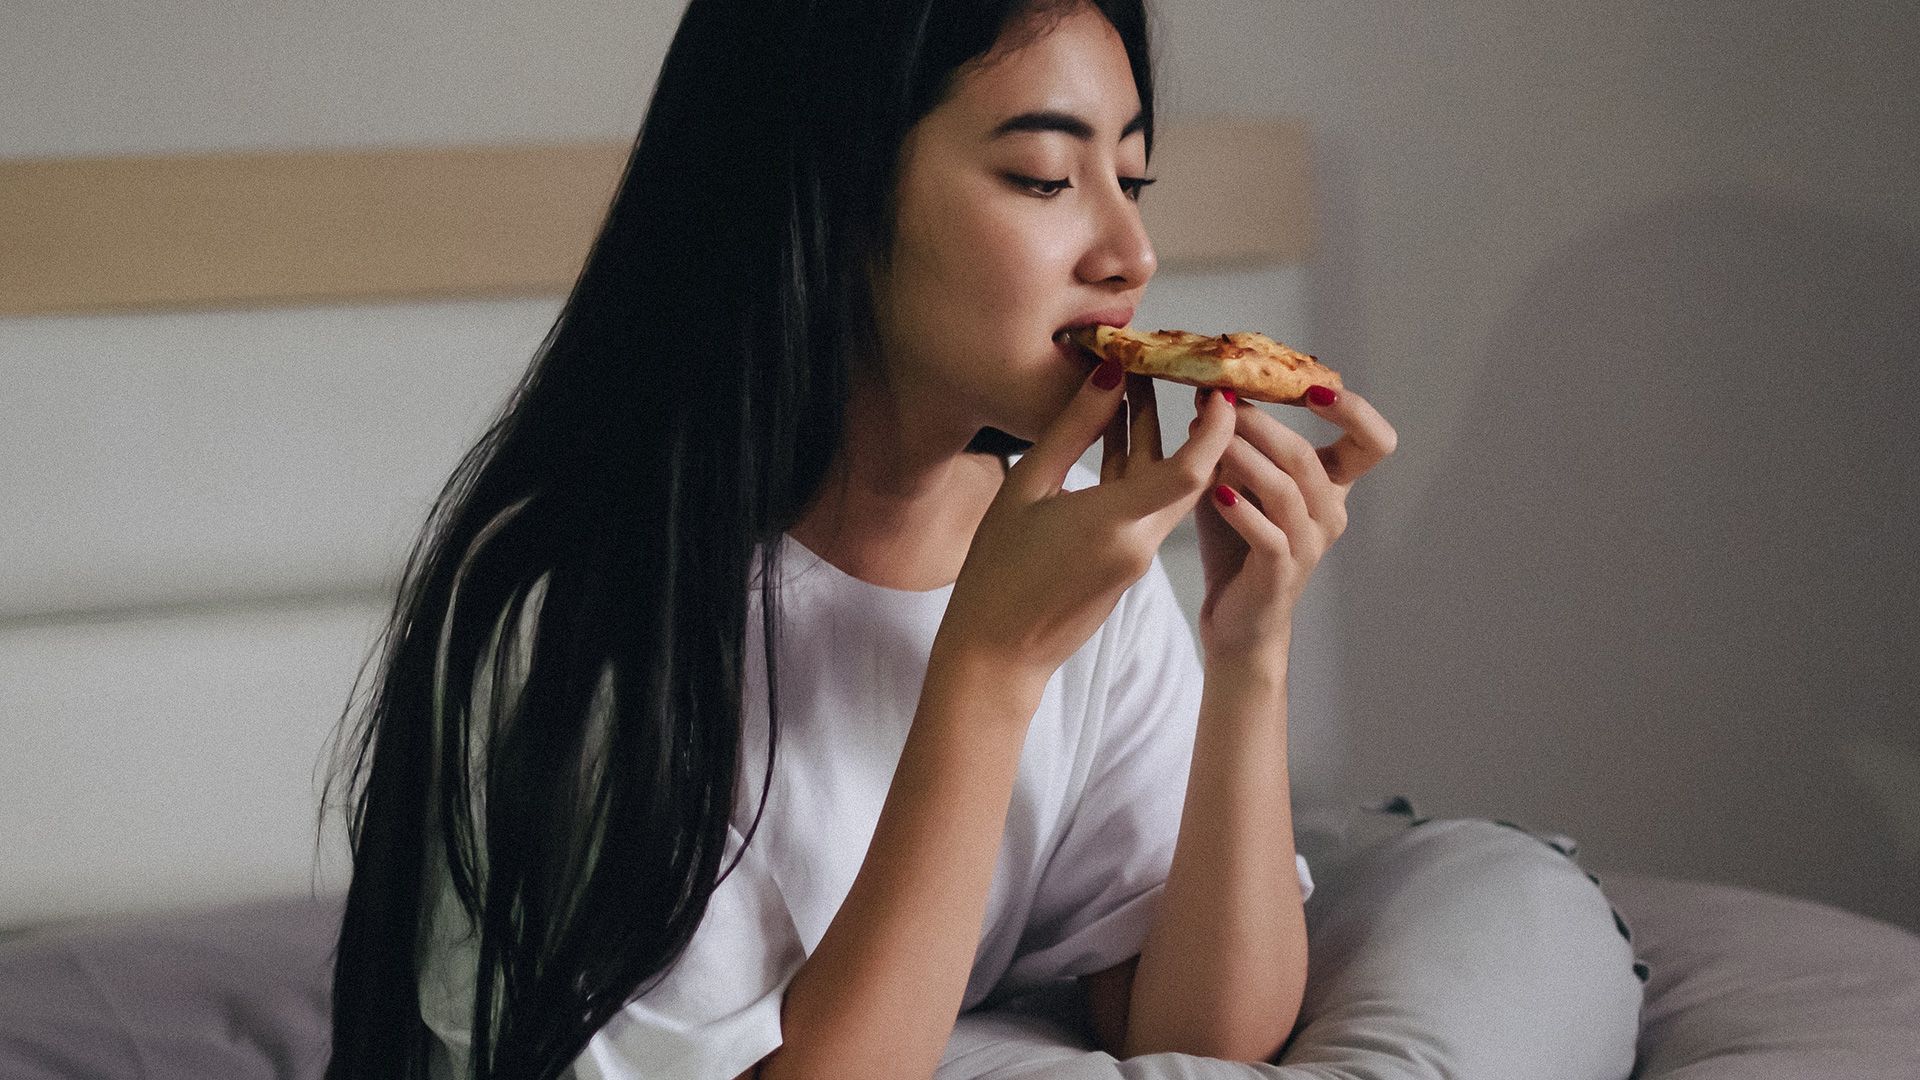 <p>                     Having trouble sleeping? Then maybe your diet is to blame. There are changes you can make to give your body a better chance of getting a good night's kip, night after night. These are the foods you should be eating (and the ones to avoid) to improve your sleep habits.                    </p>                                      <p>                     Let's begin by looking at how your general food habits influence your ability to sleep, then we'll reveal six foods that could help you sleep better.                   </p>